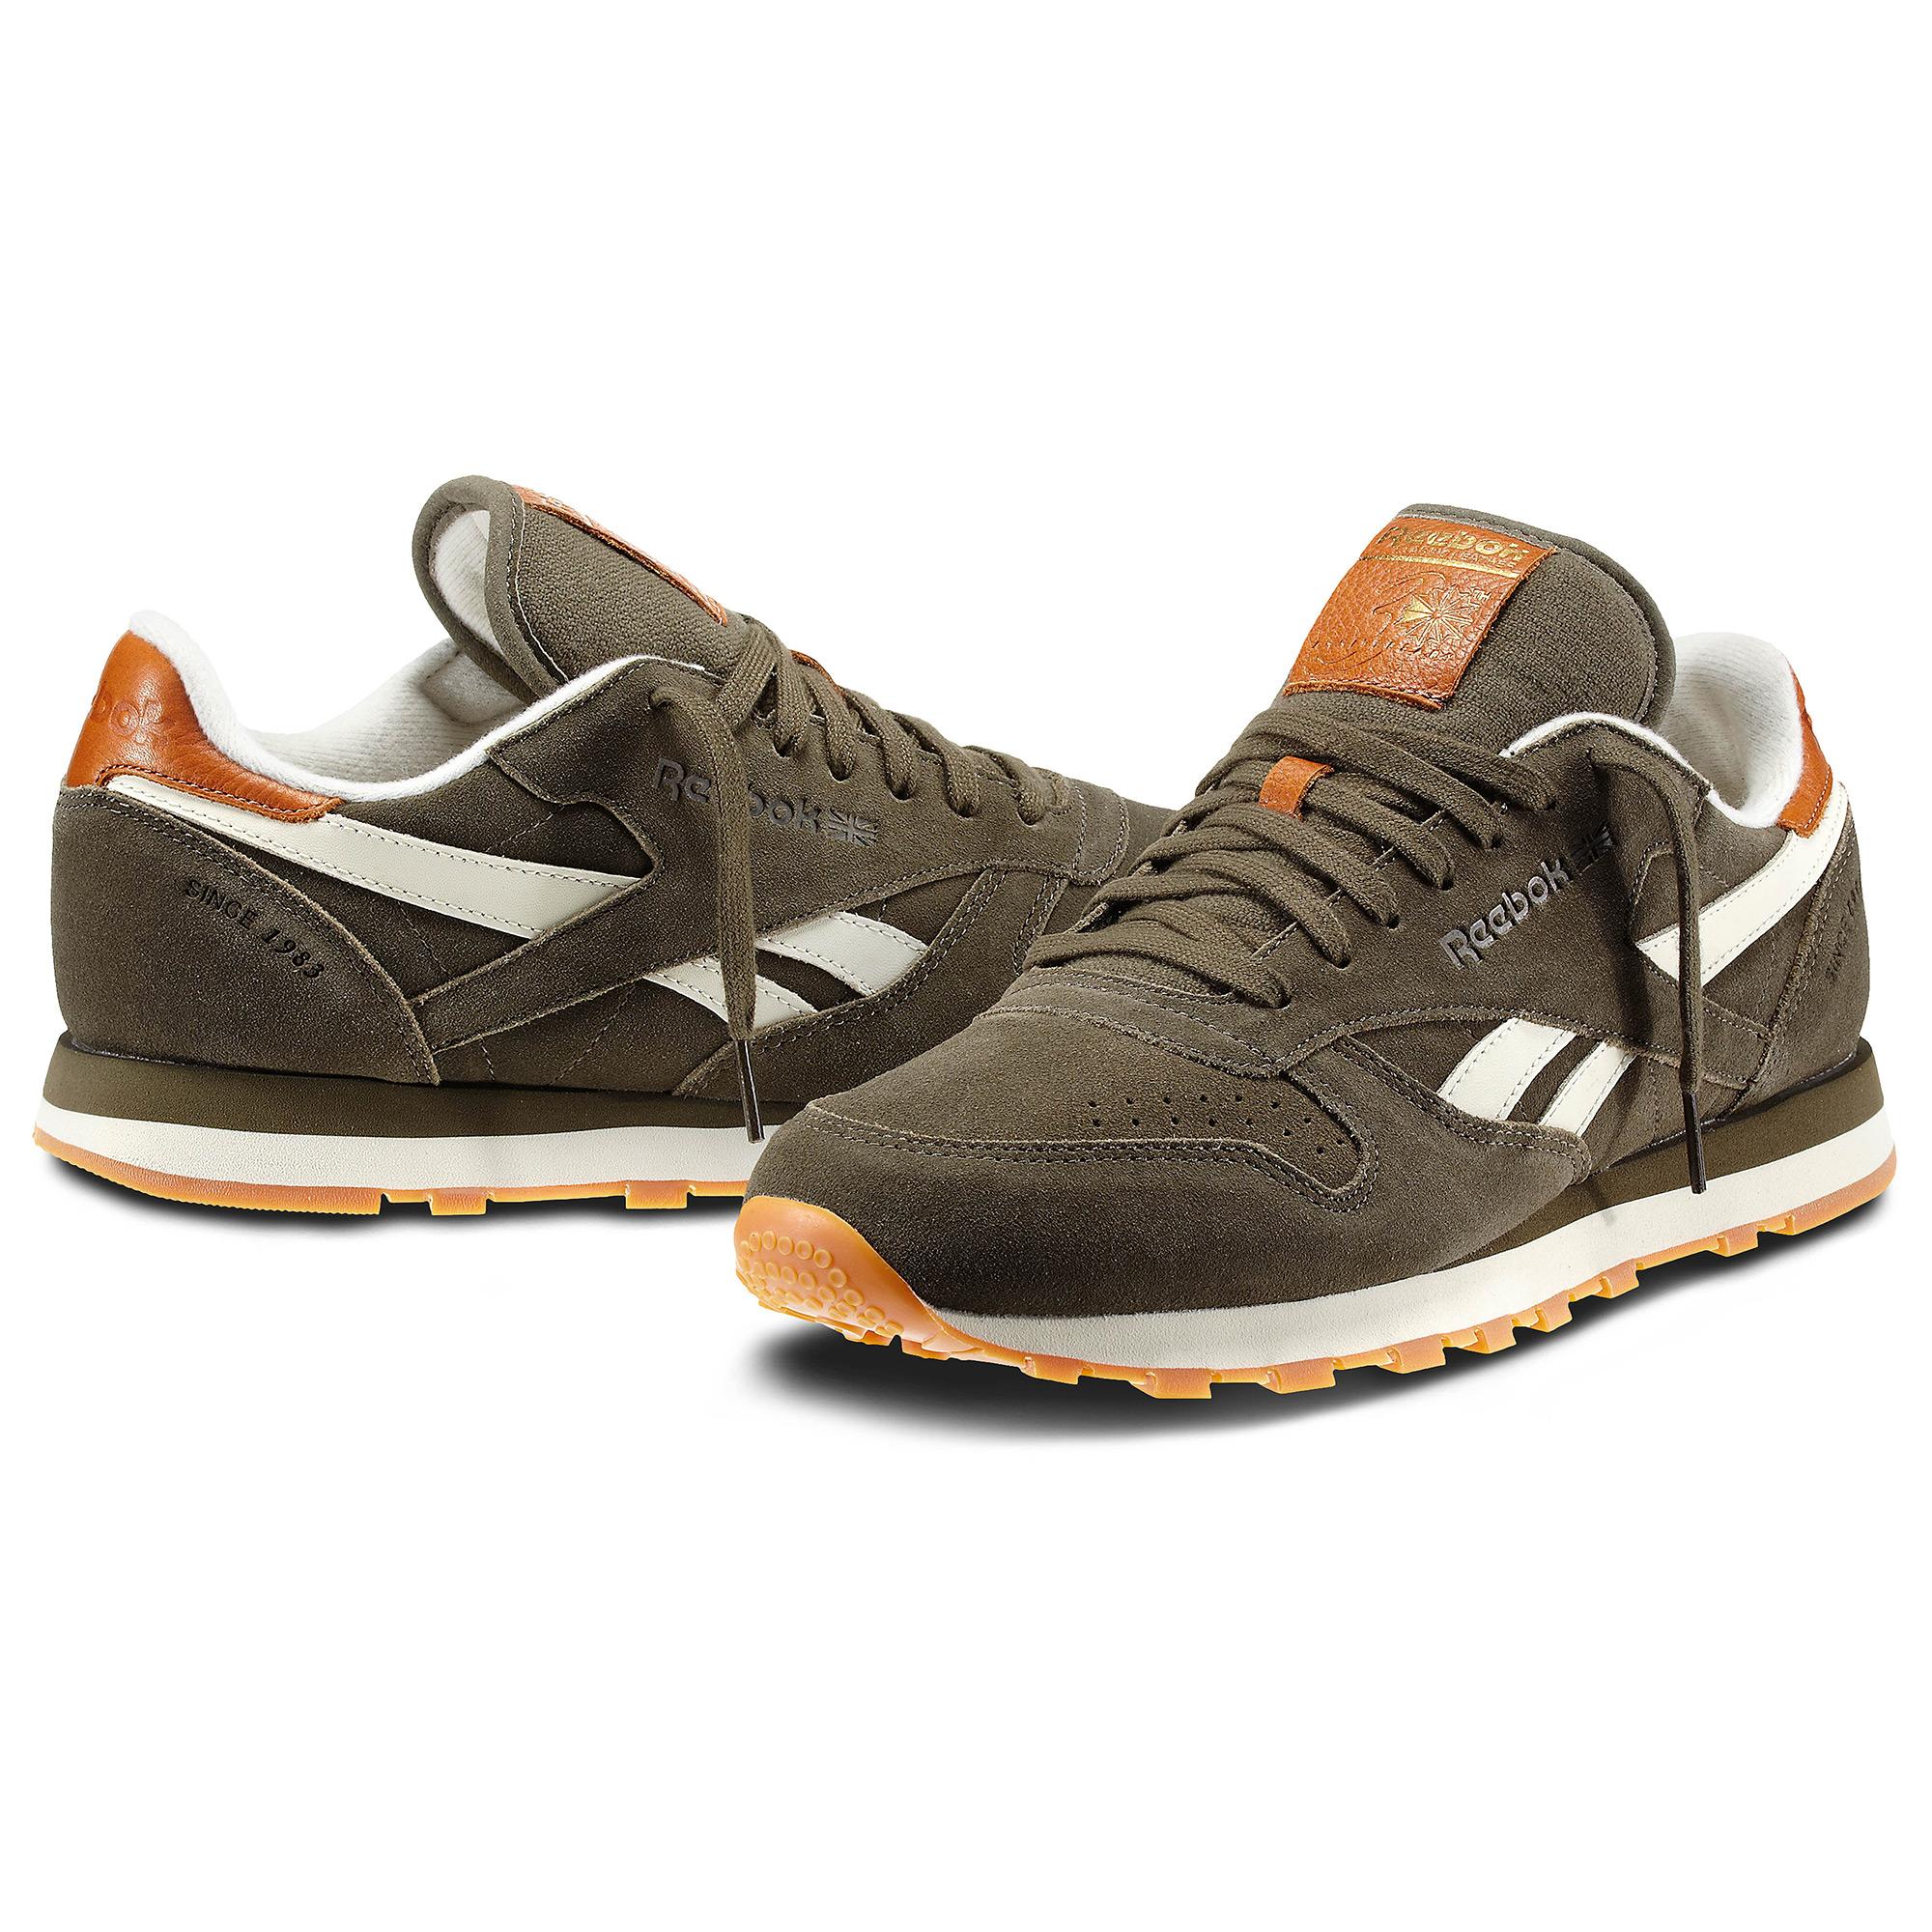 Foto Reebok Classic Leather Suede Hombre